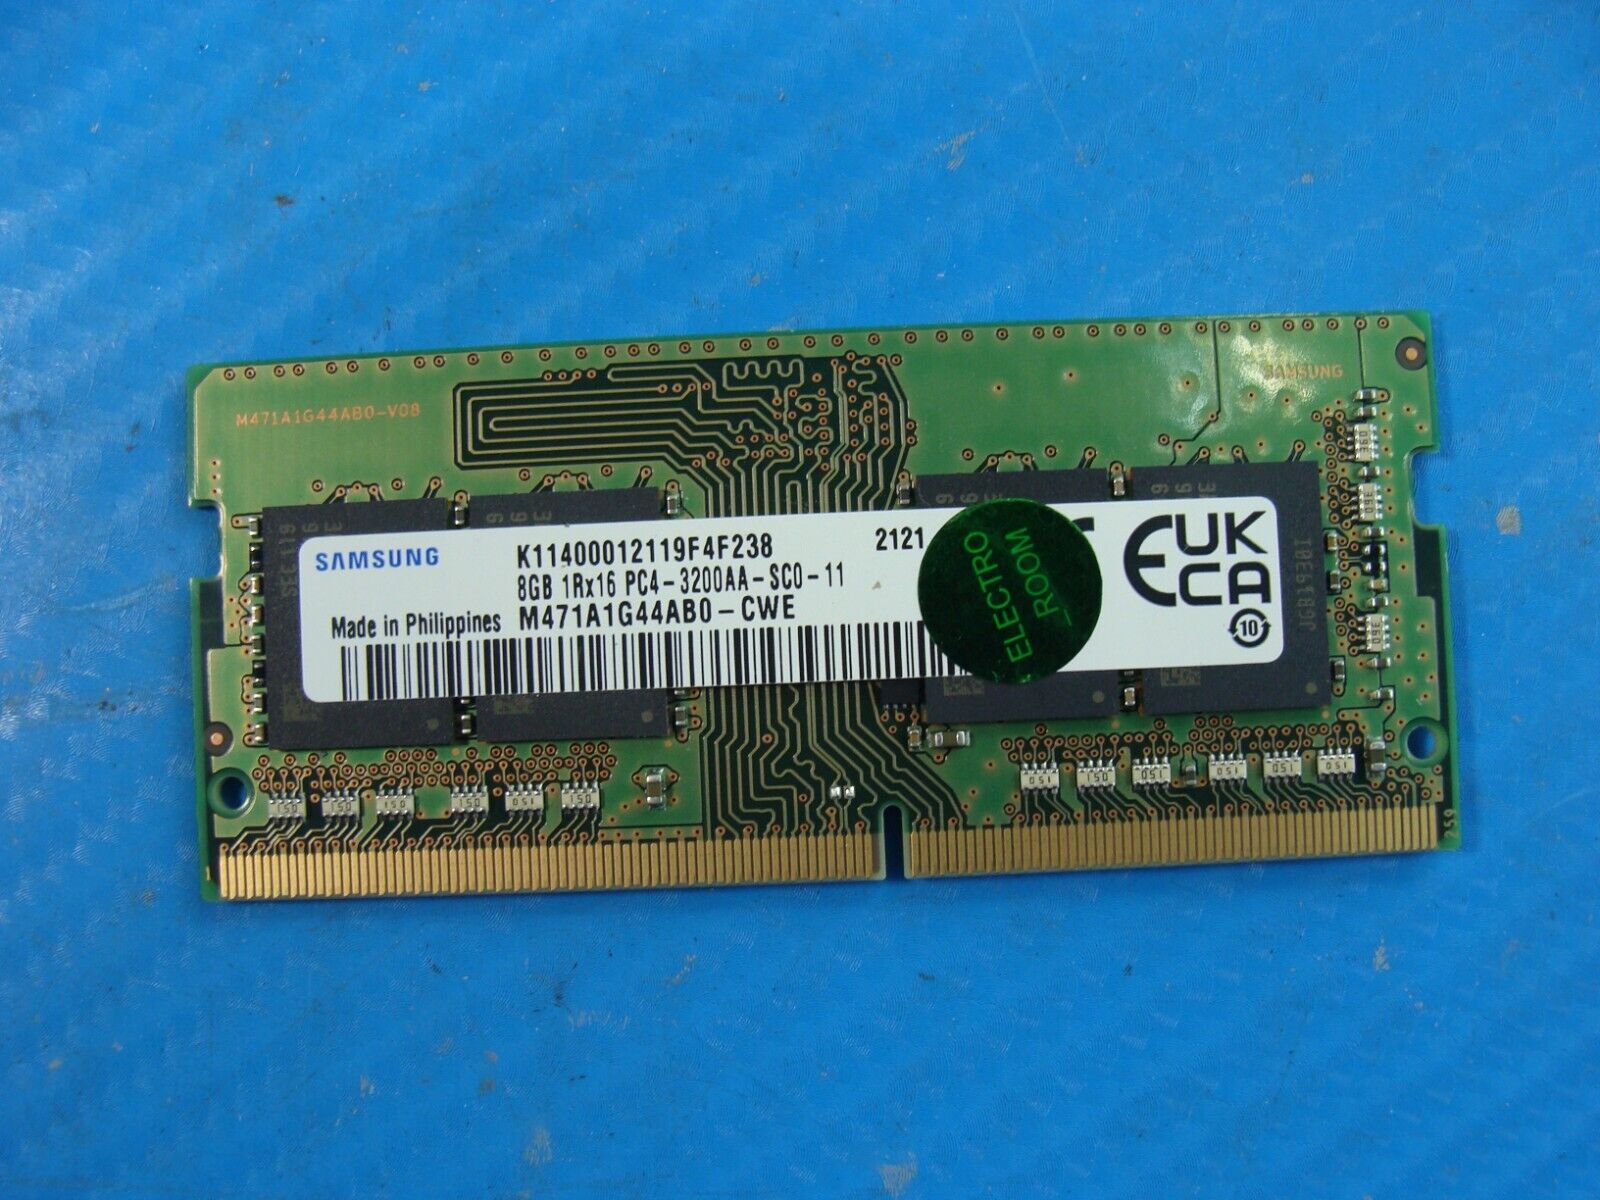 Dell 14 7415 Samsung 8GB 1Rx16 PC4-3200AA Memory RAM SO-DIMM M471A1G44AB0-CWE